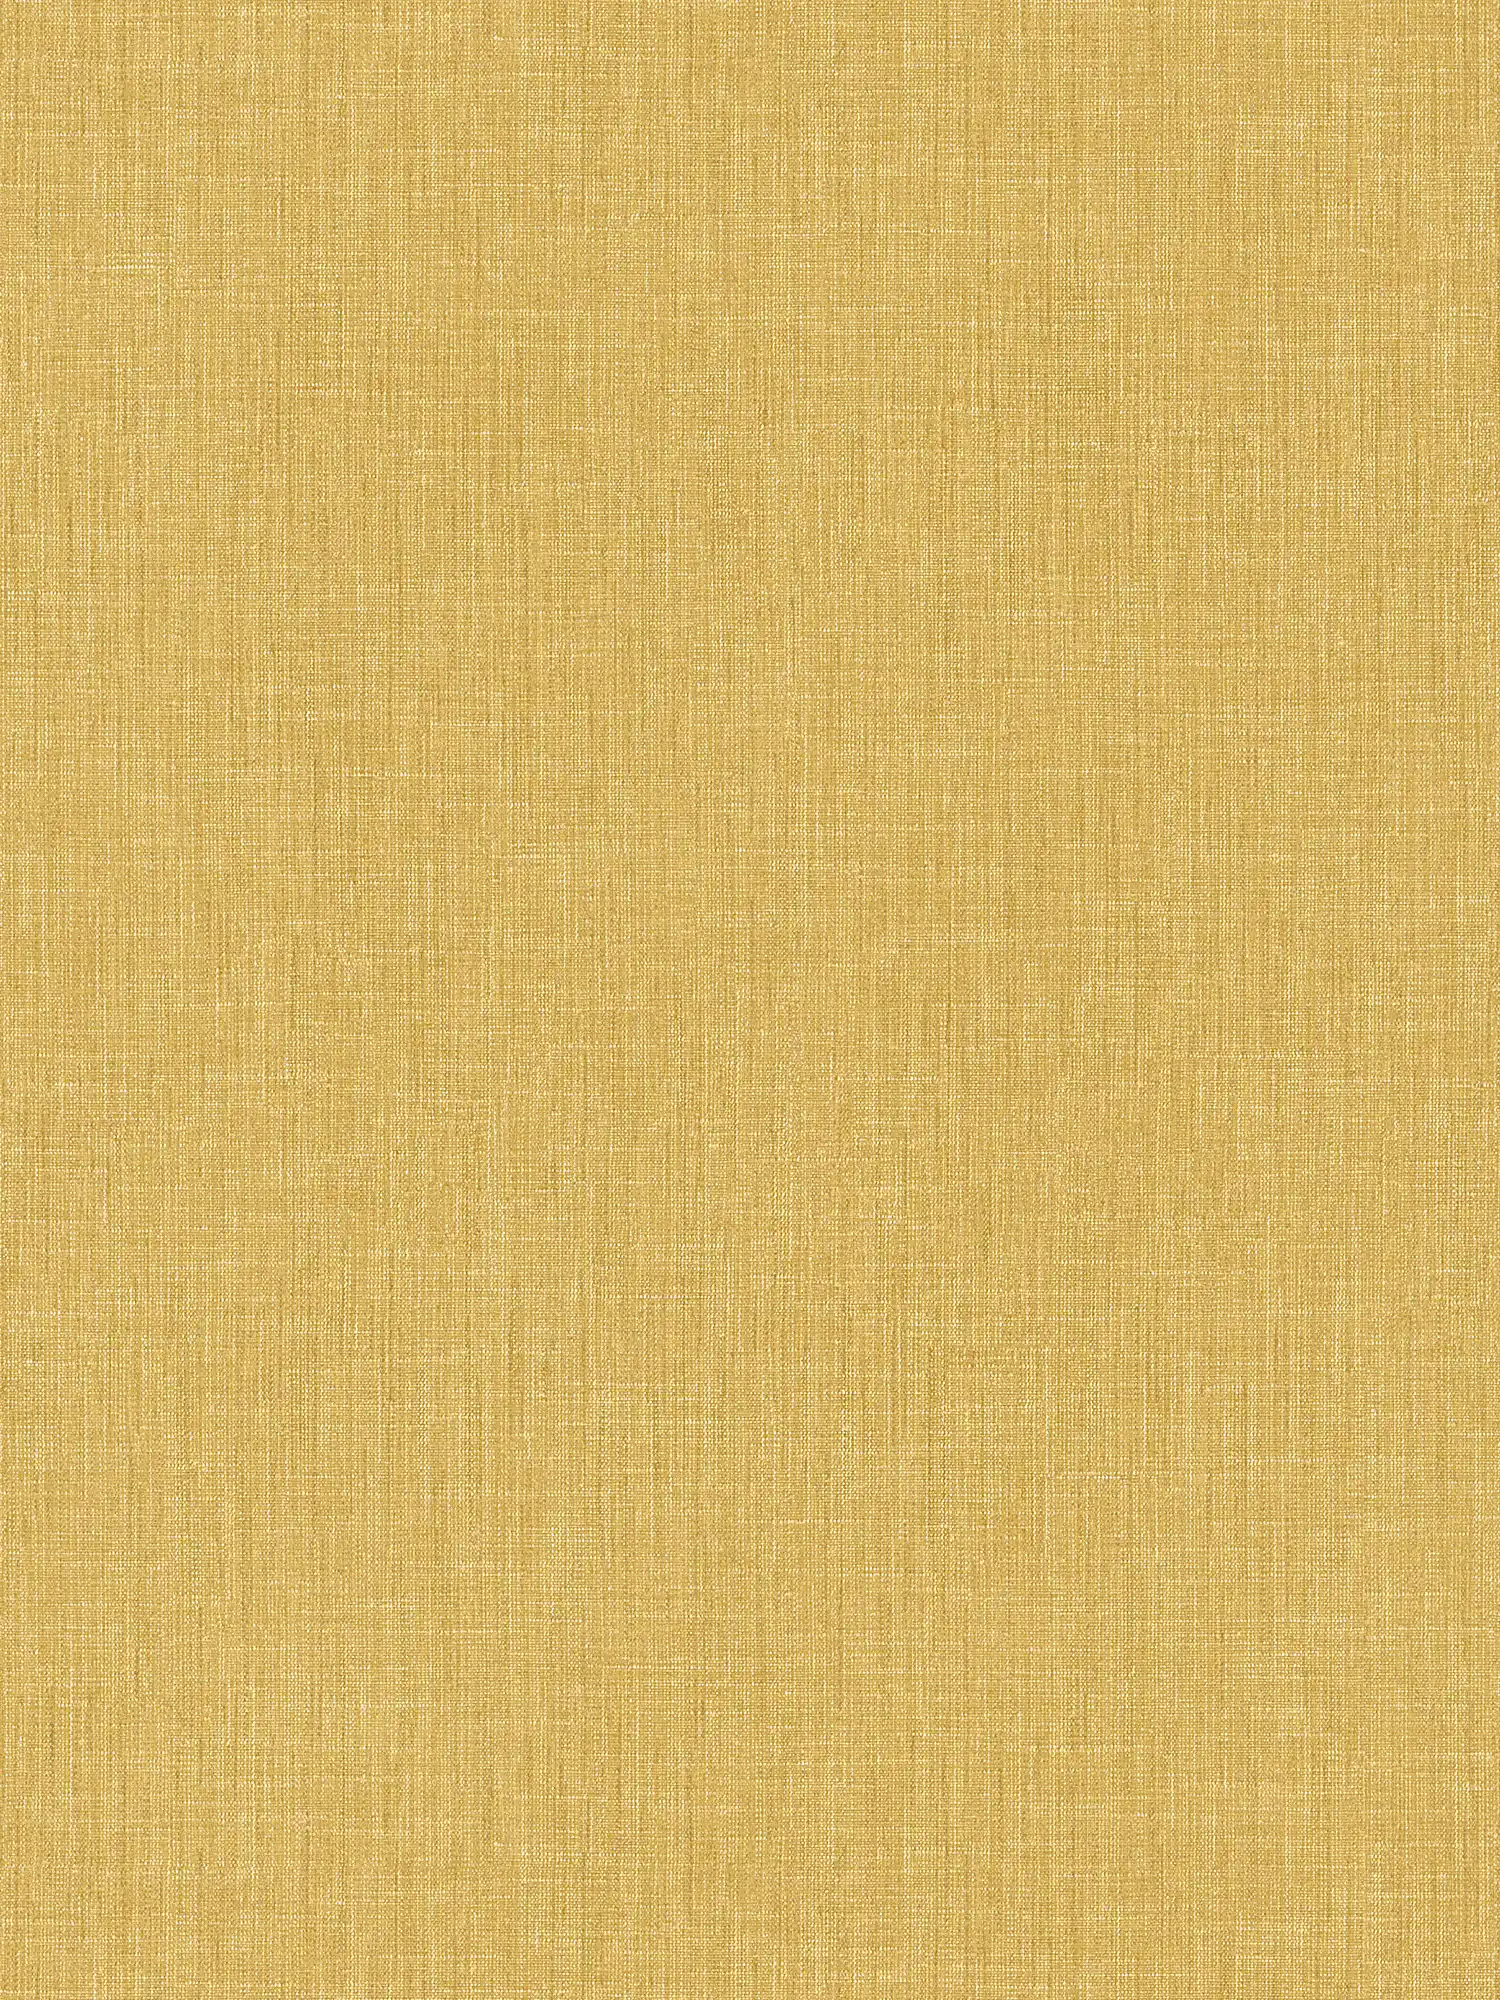 Plain wallpaper with textile structure - yellow
